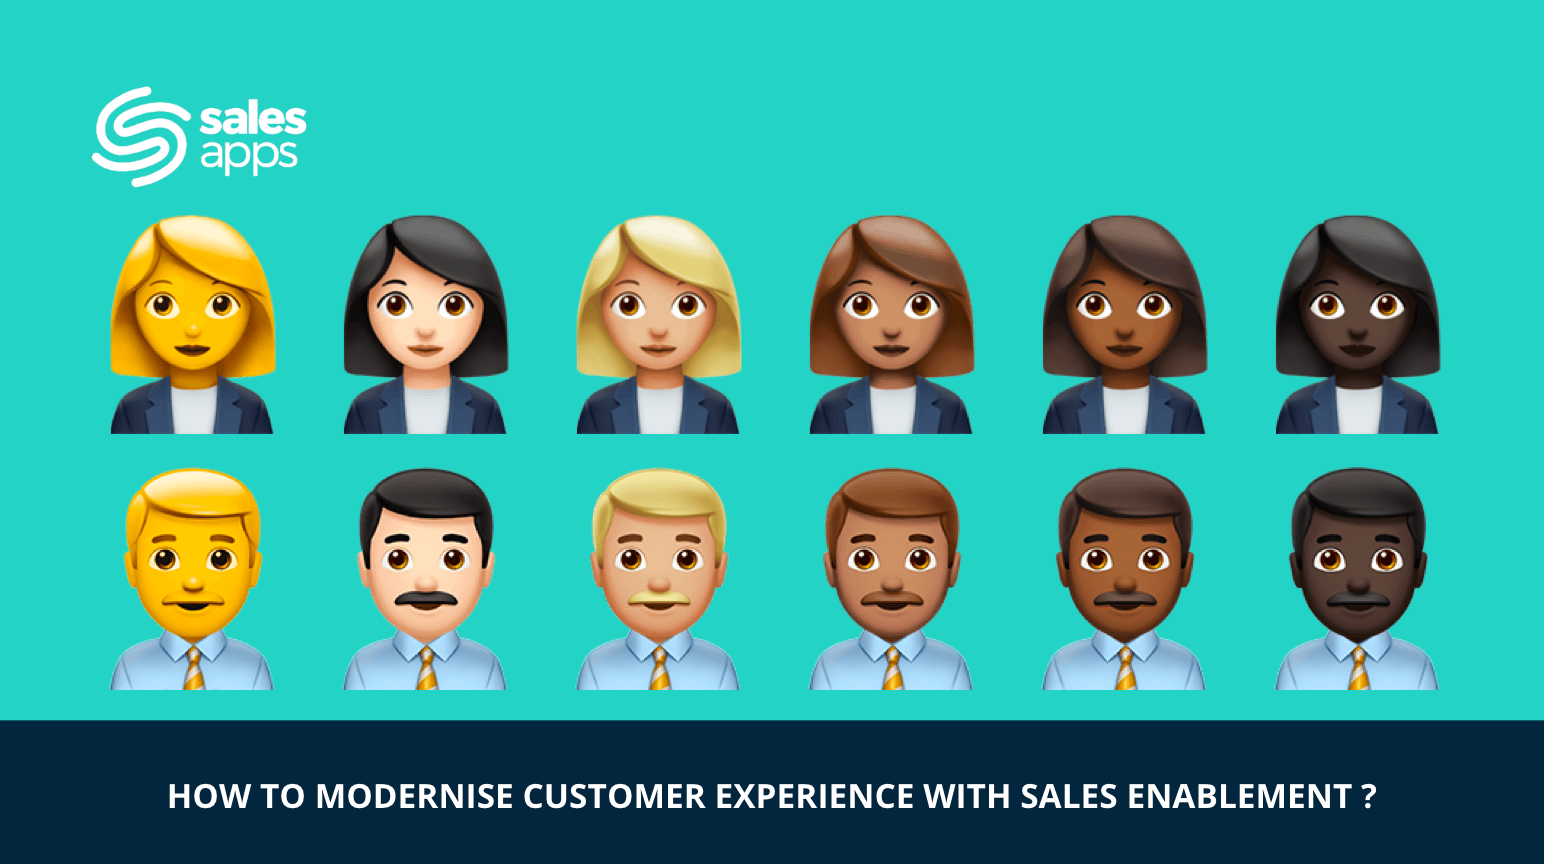 How to modernize the customer experience with Sales Enablement?